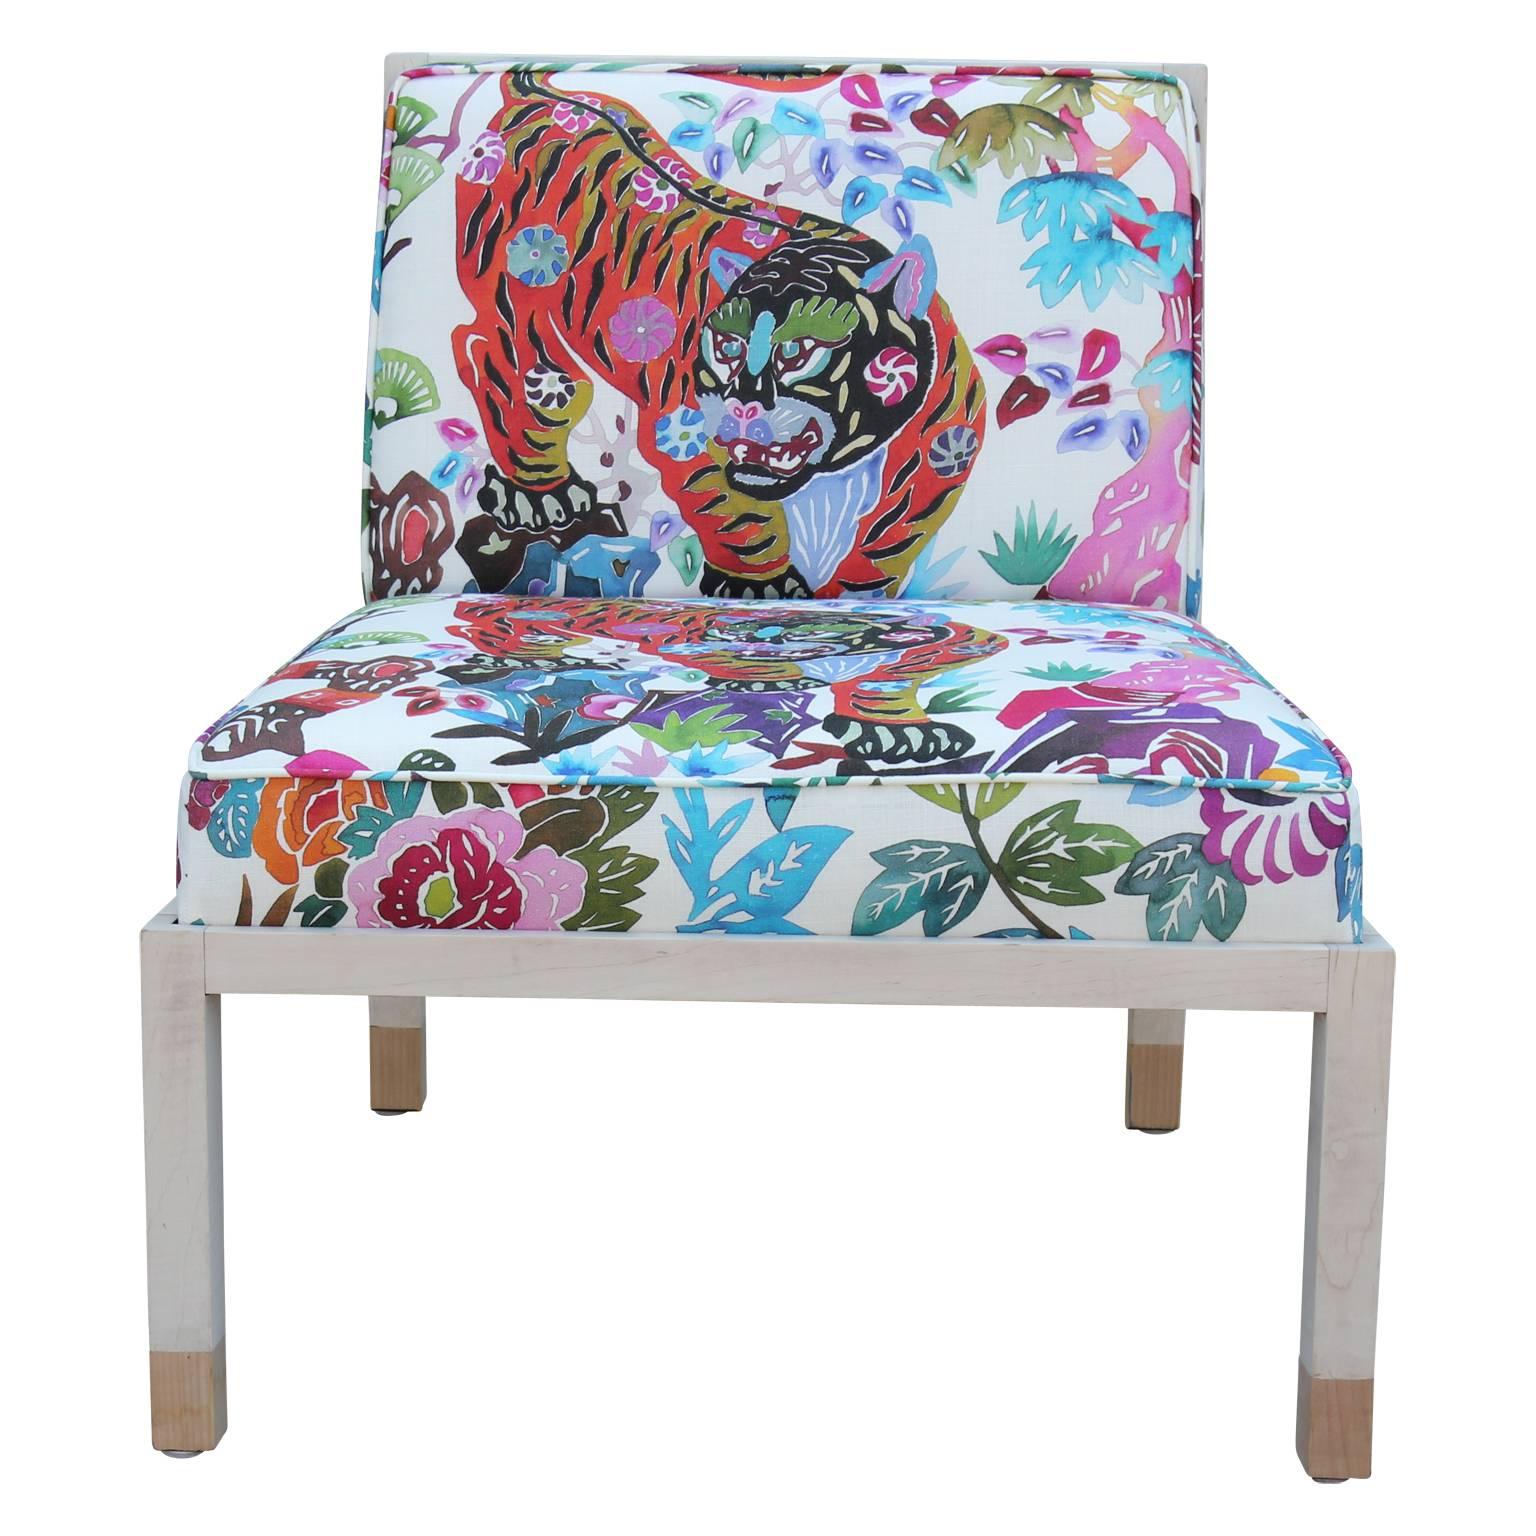 Pair of stunning Michael Taylor slipper lounge chairs by Baker Furniture Co. masterfully upholstered in fresh multicolored tiger fabric. Very unique and wonderful statement pieces for any room.  